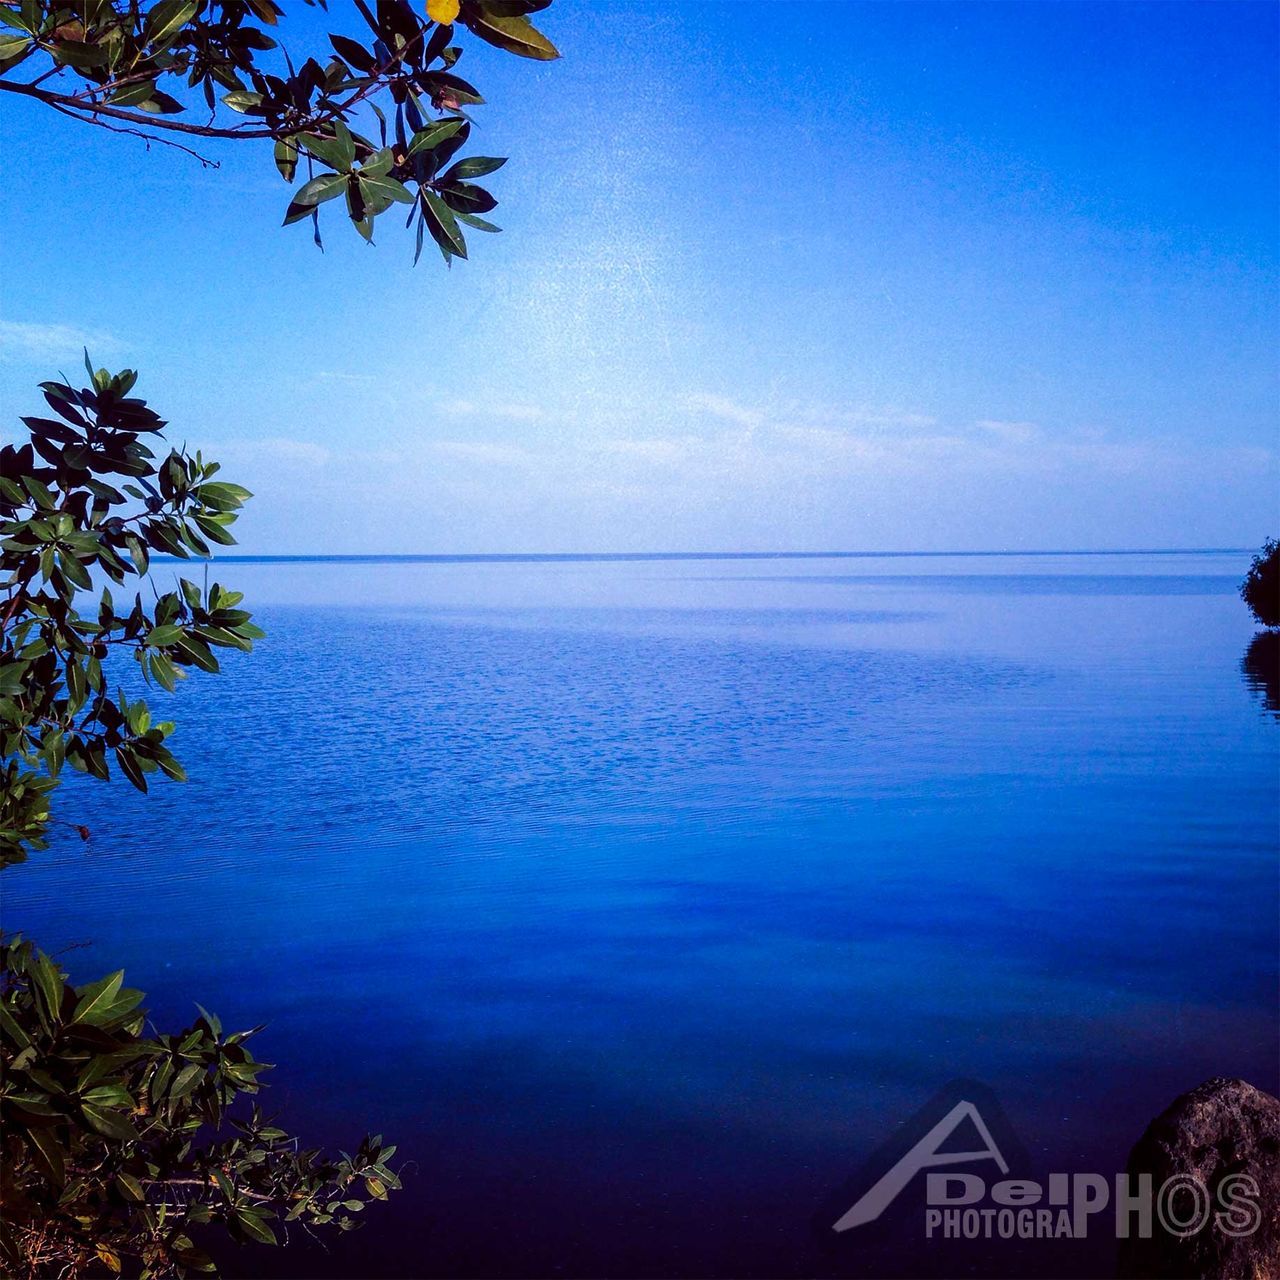 water, tranquil scene, blue, tranquility, horizon over water, scenics, sea, beauty in nature, tree, nature, sky, idyllic, copy space, clear sky, calm, reflection, seascape, lake, no people, waterfront